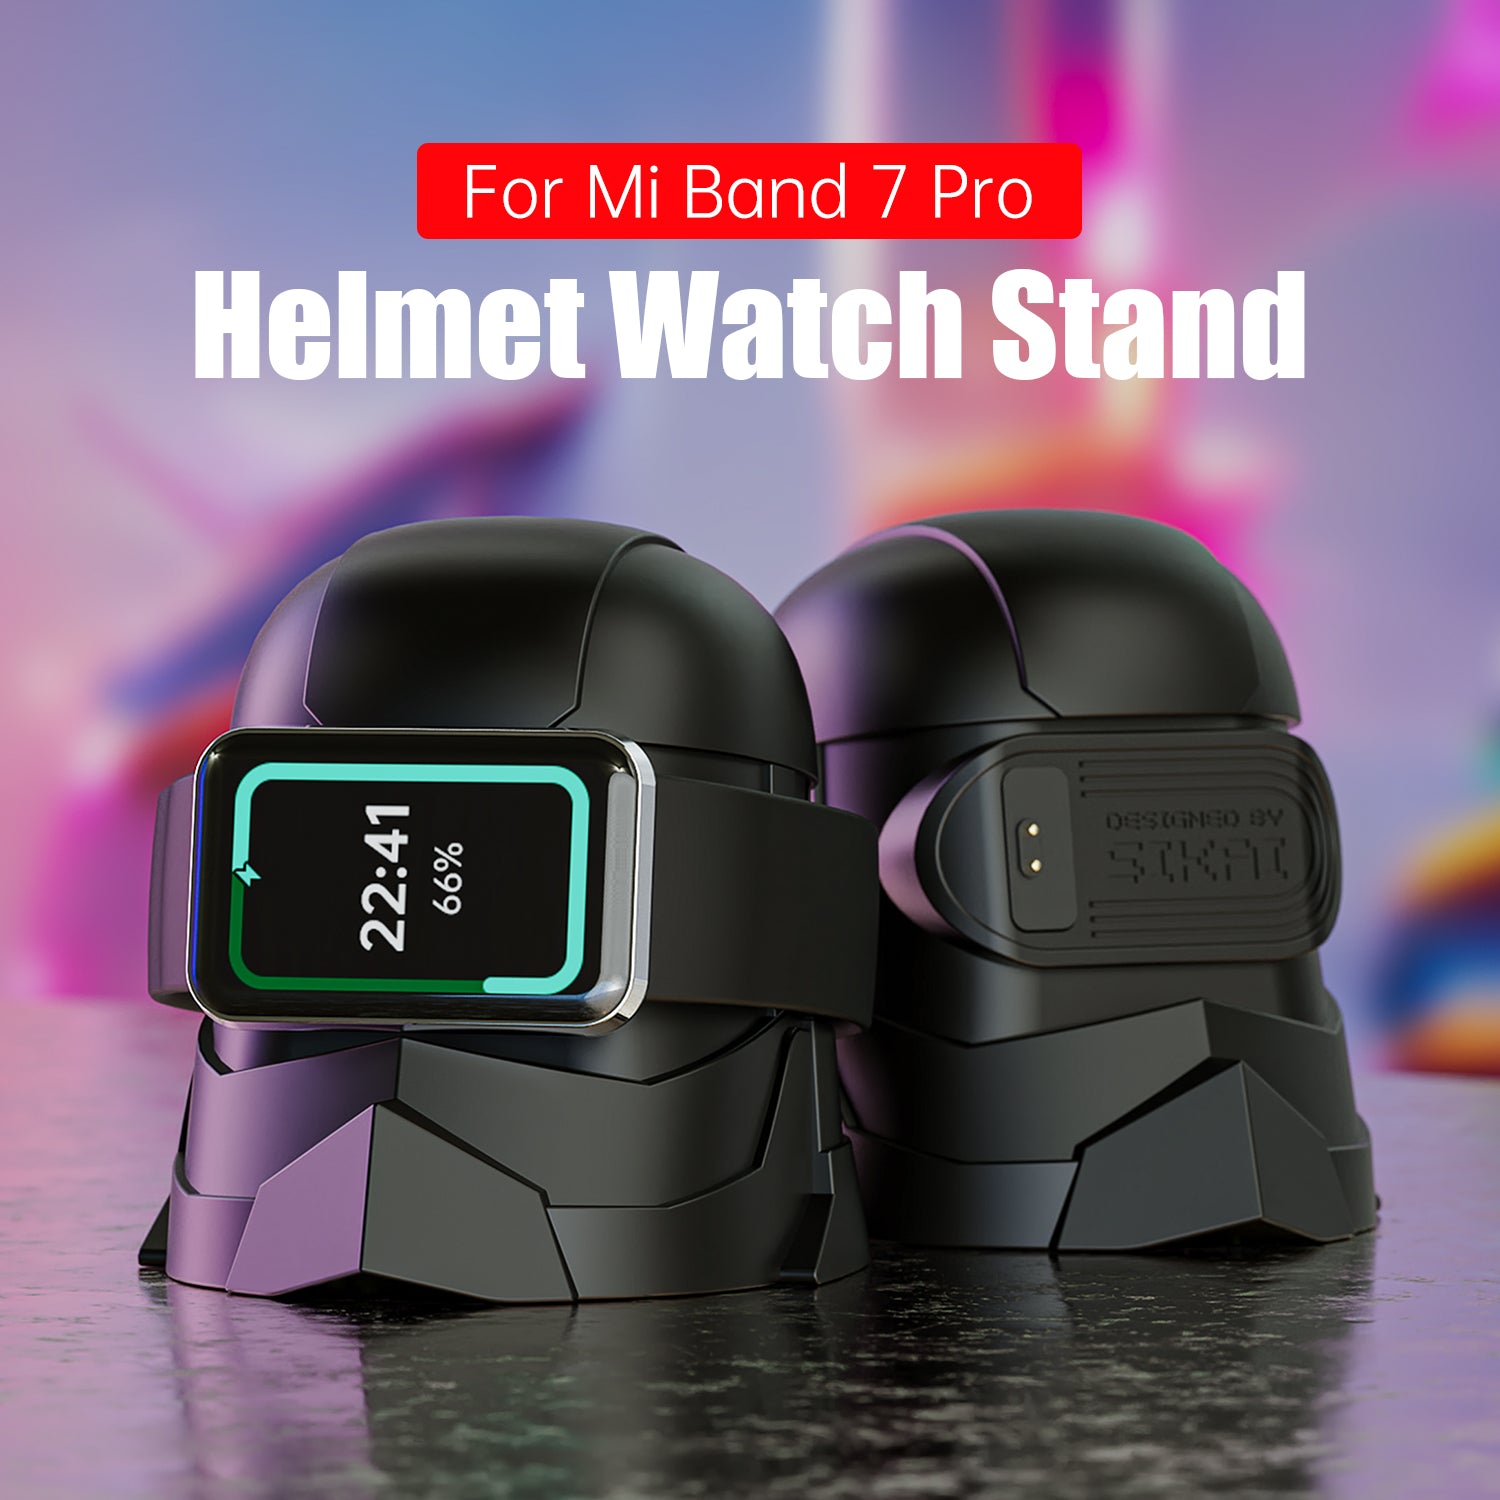 Stormer Silicone Stand for Xiaomi Mi Band 8Pro, 7 Pro / Redmi Smart Band Pro Charger Station Dock, Compatible with Xiaomi 8 Pro Smart Band SIKAI CASE